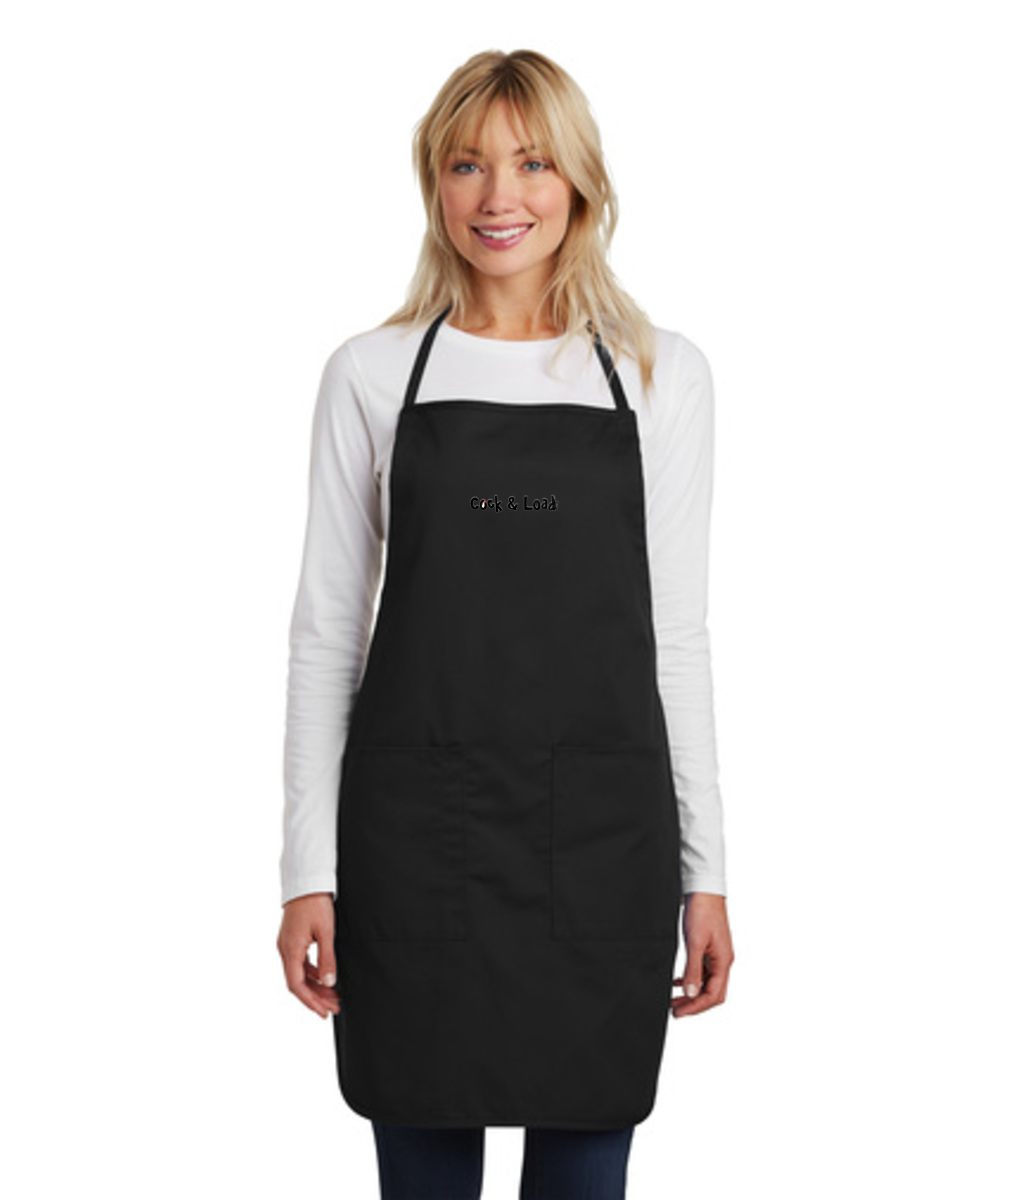 Cock n load Embroidered Full-Length Apron or Similar